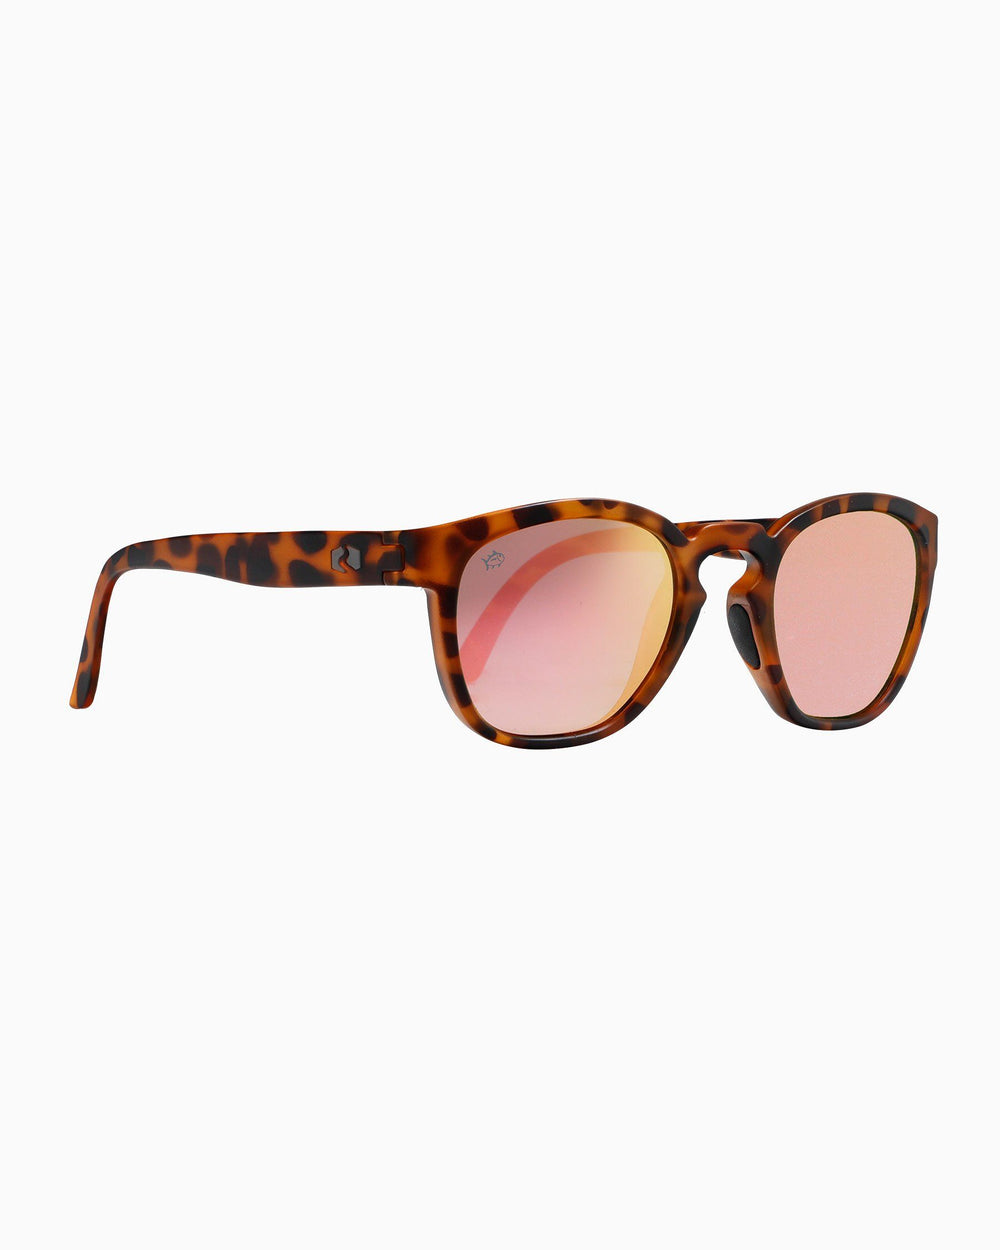 The side of the Rheos Seabrooks Sunglasses by Southern Tide - Tortoise Rose